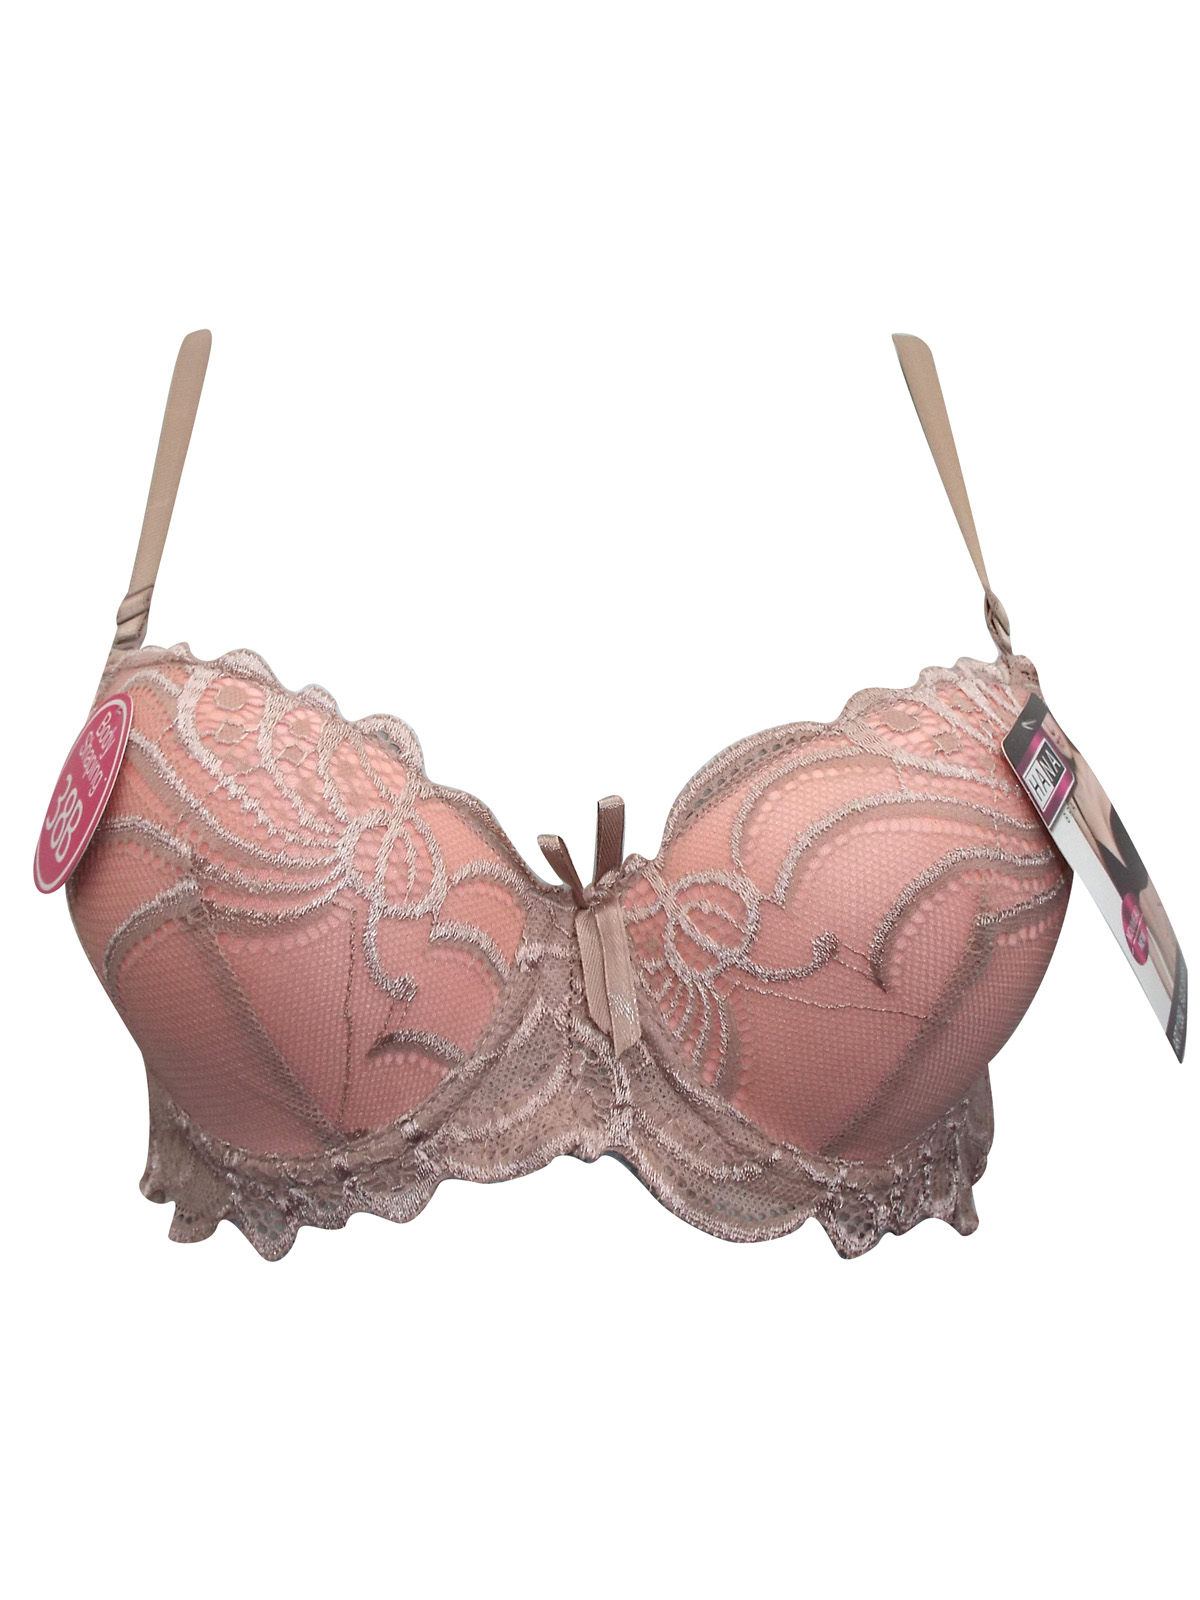 Hana - - Hana BLUSH Floral Lace Padded & Wired Body Shaping Multiway Bra -  Size 36 to 46